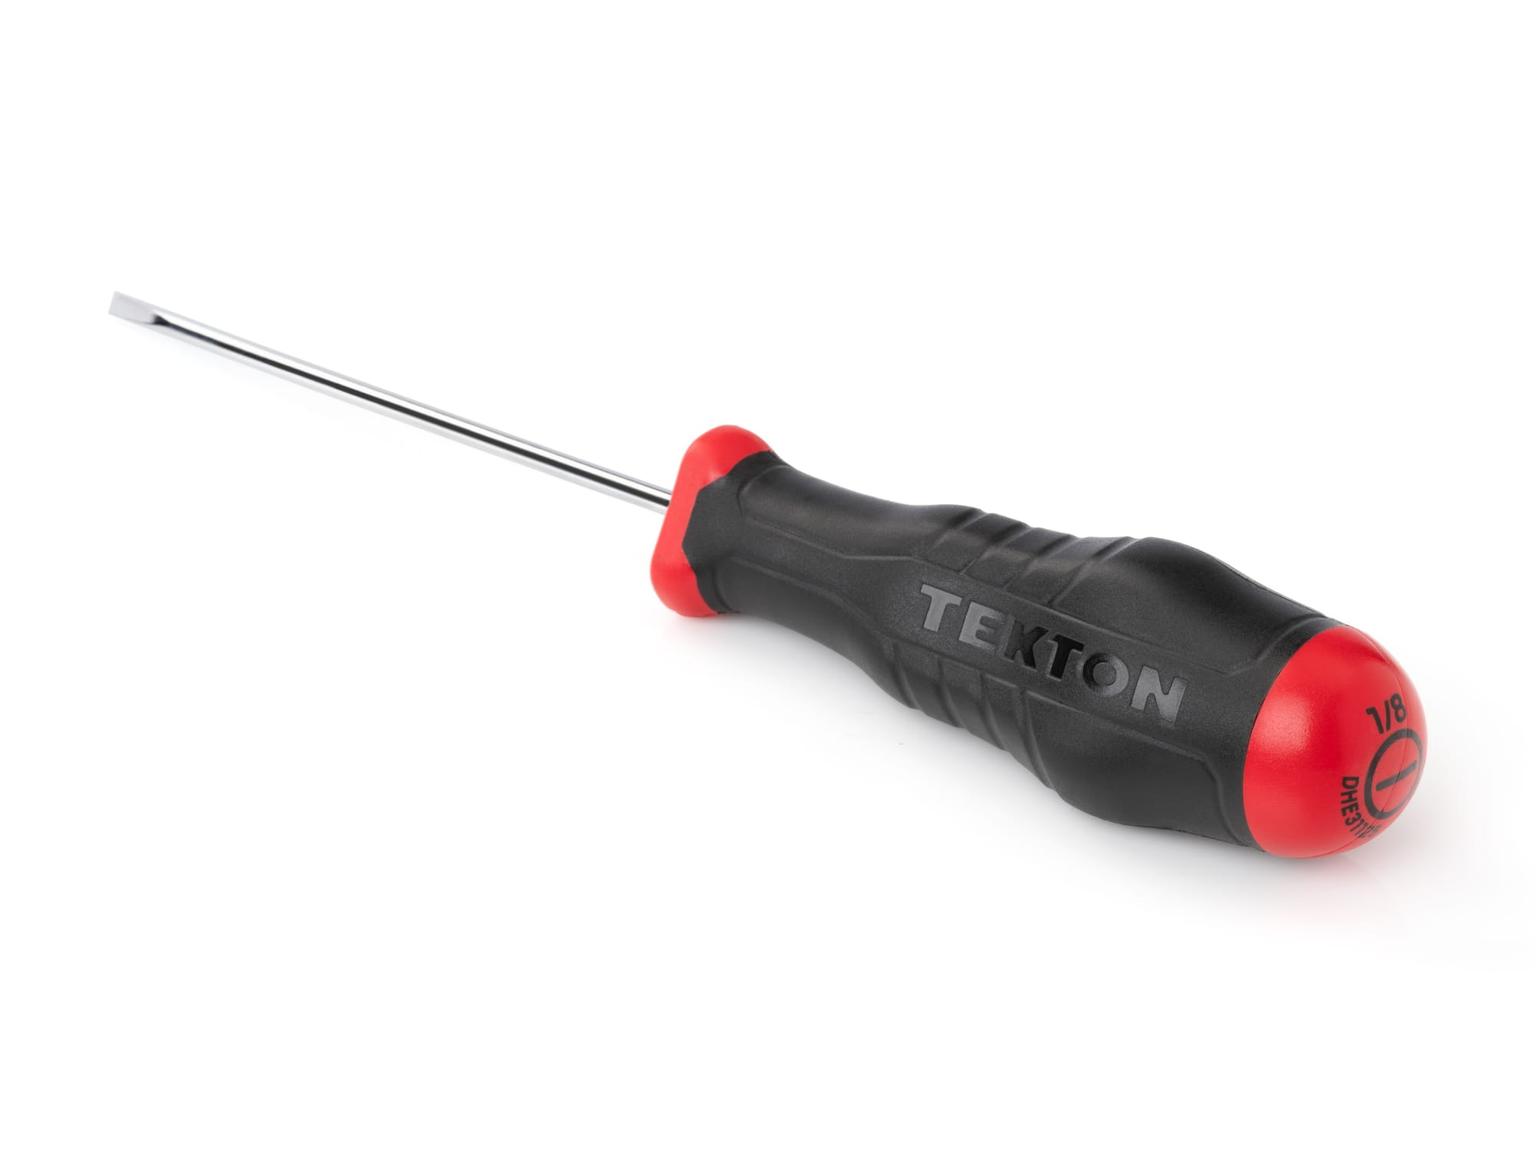 TEKTON DHE31125-T 1/8 Inch Slotted High-Torque Screwdriver